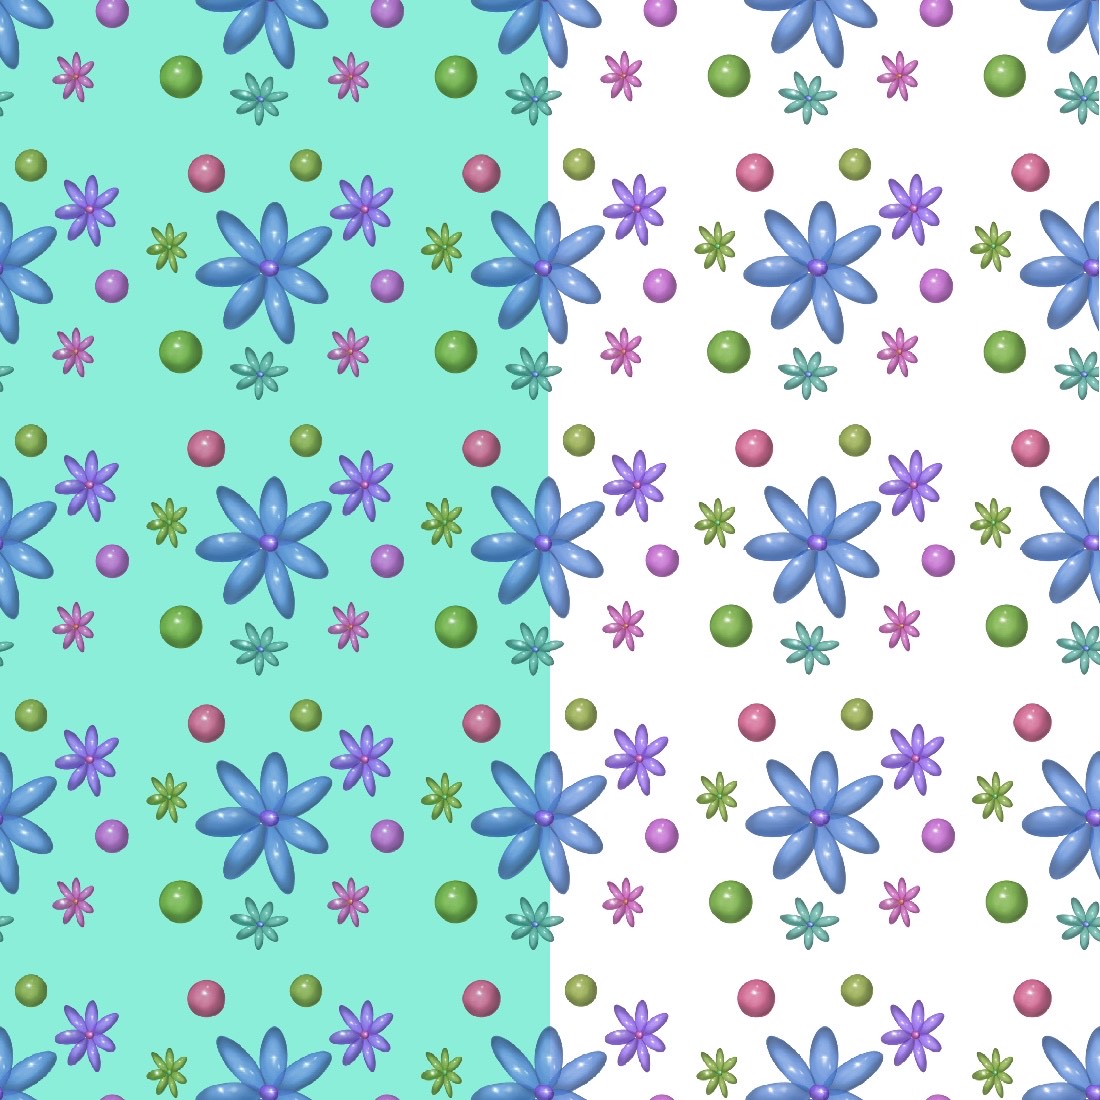 Balloon pattern preview image.